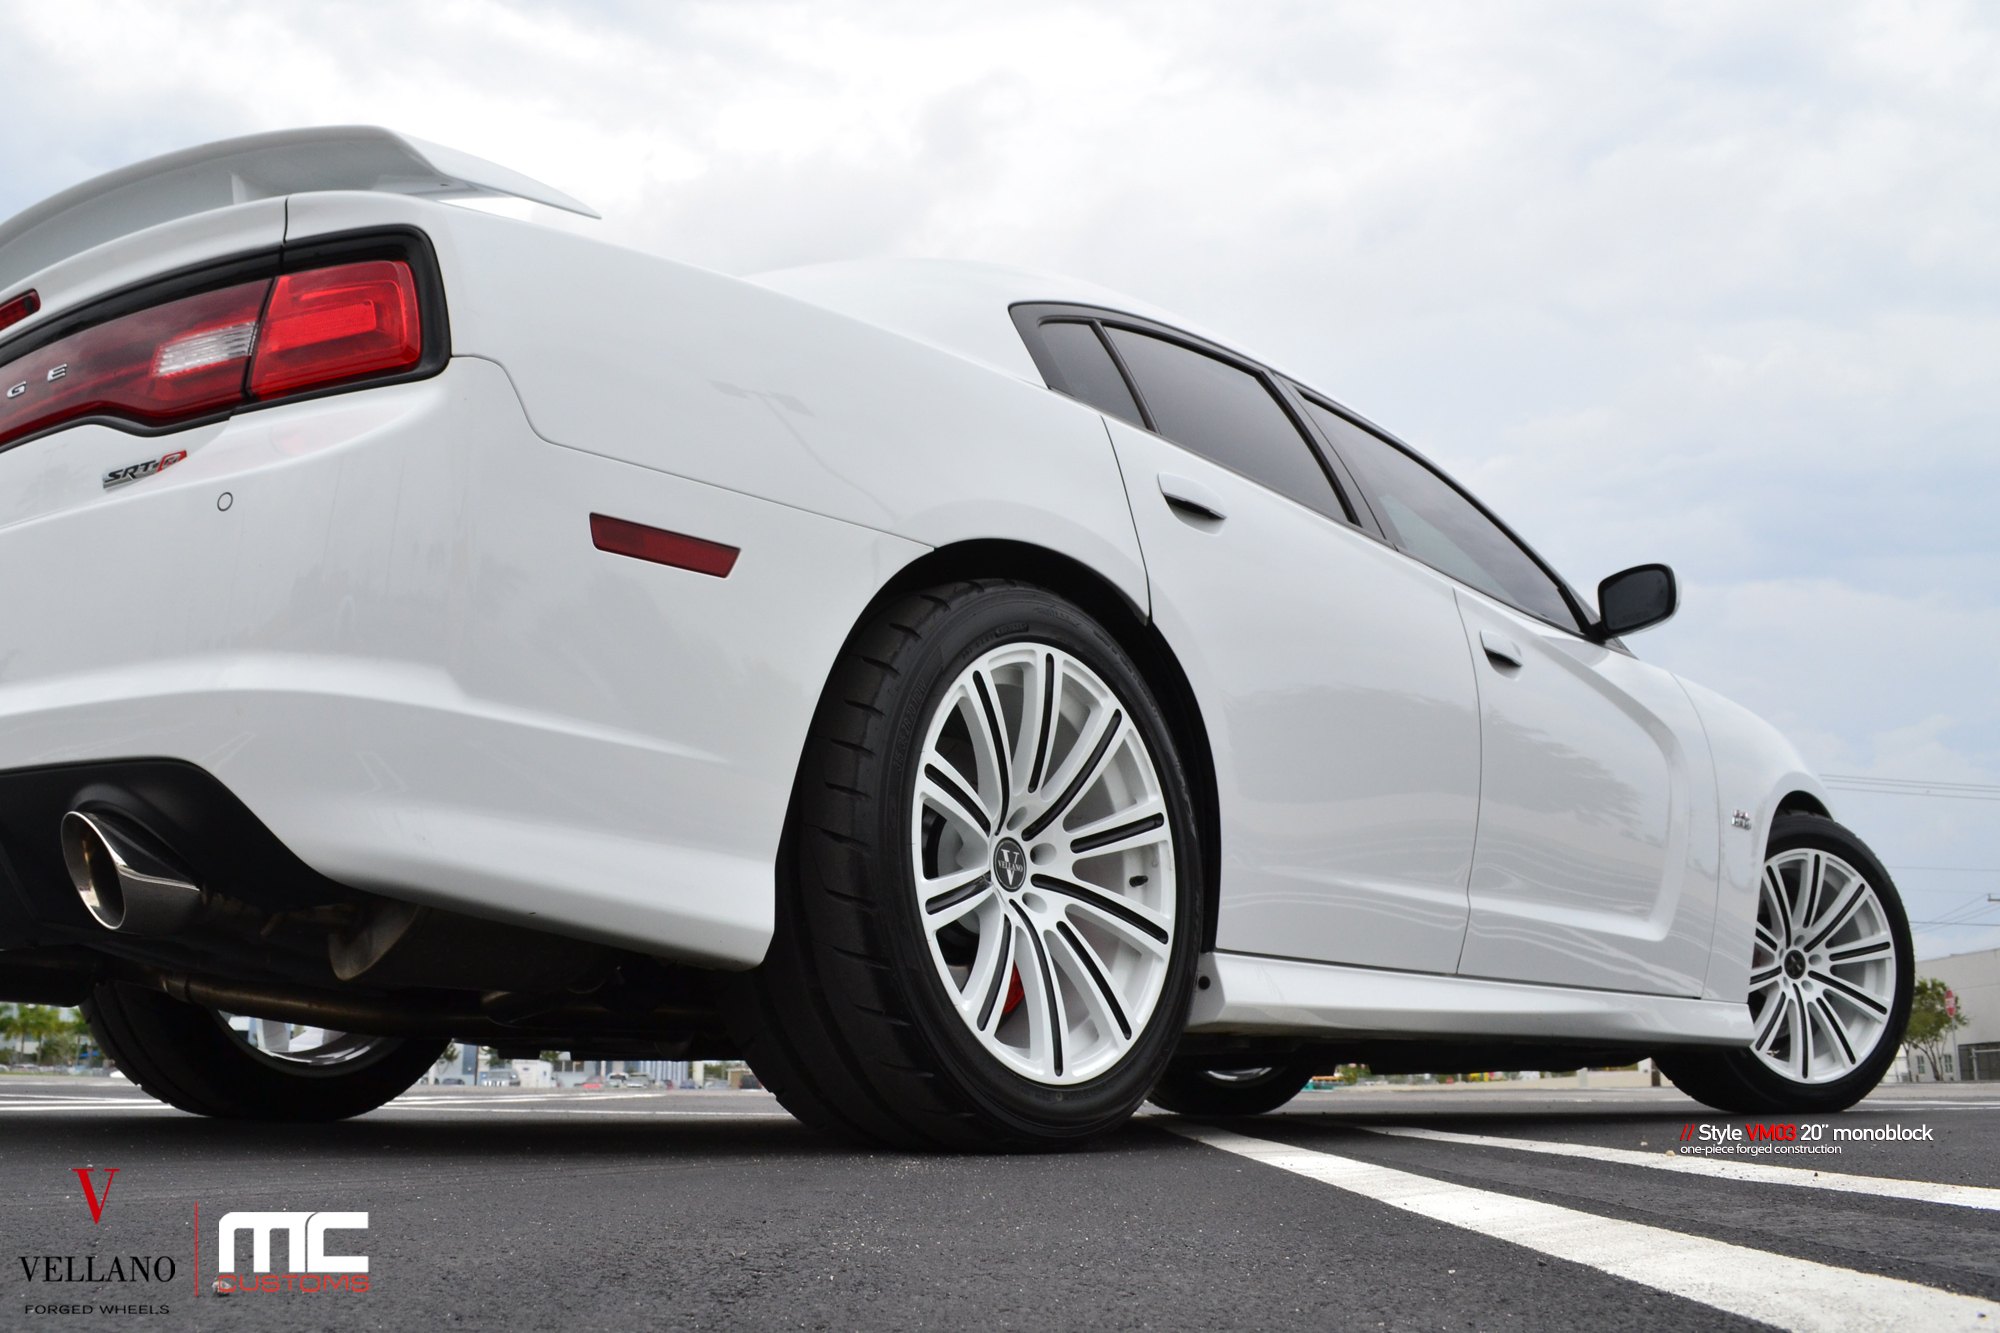 Rear Lip Spoiler on White Dodge Charger - Photo by Vellano